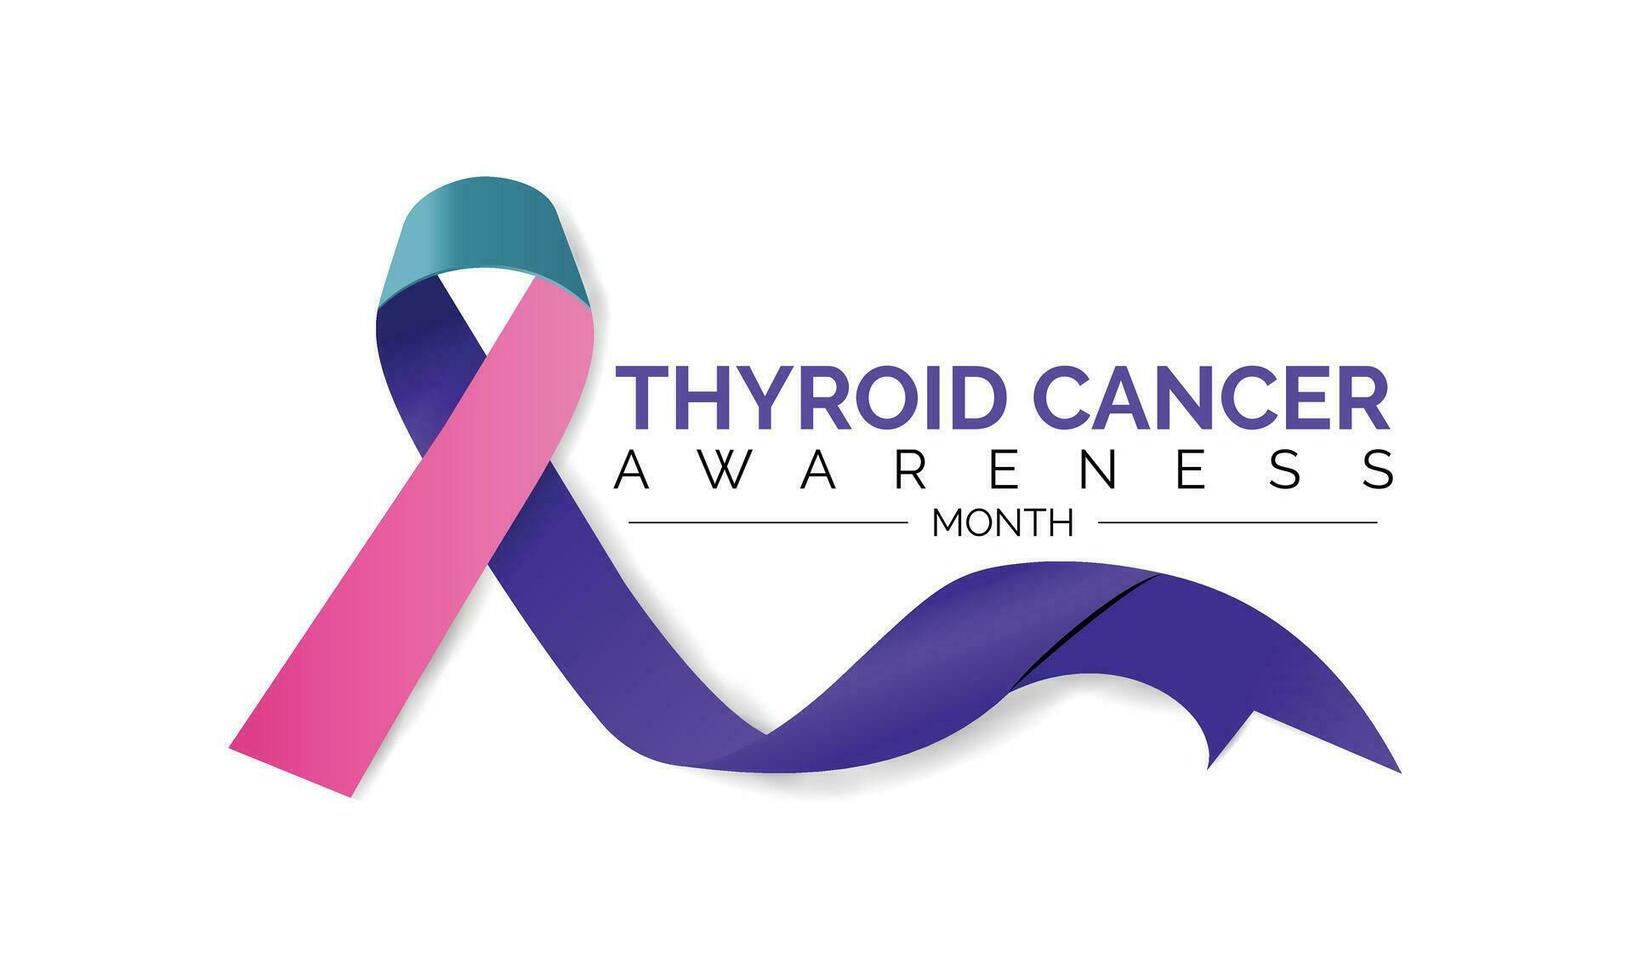 Thyroid cancer awareness month September. Calligraphy Poster Design. Realistic Teal and Pink and Blue Ribbon. September is Cancer Awareness Month. vector